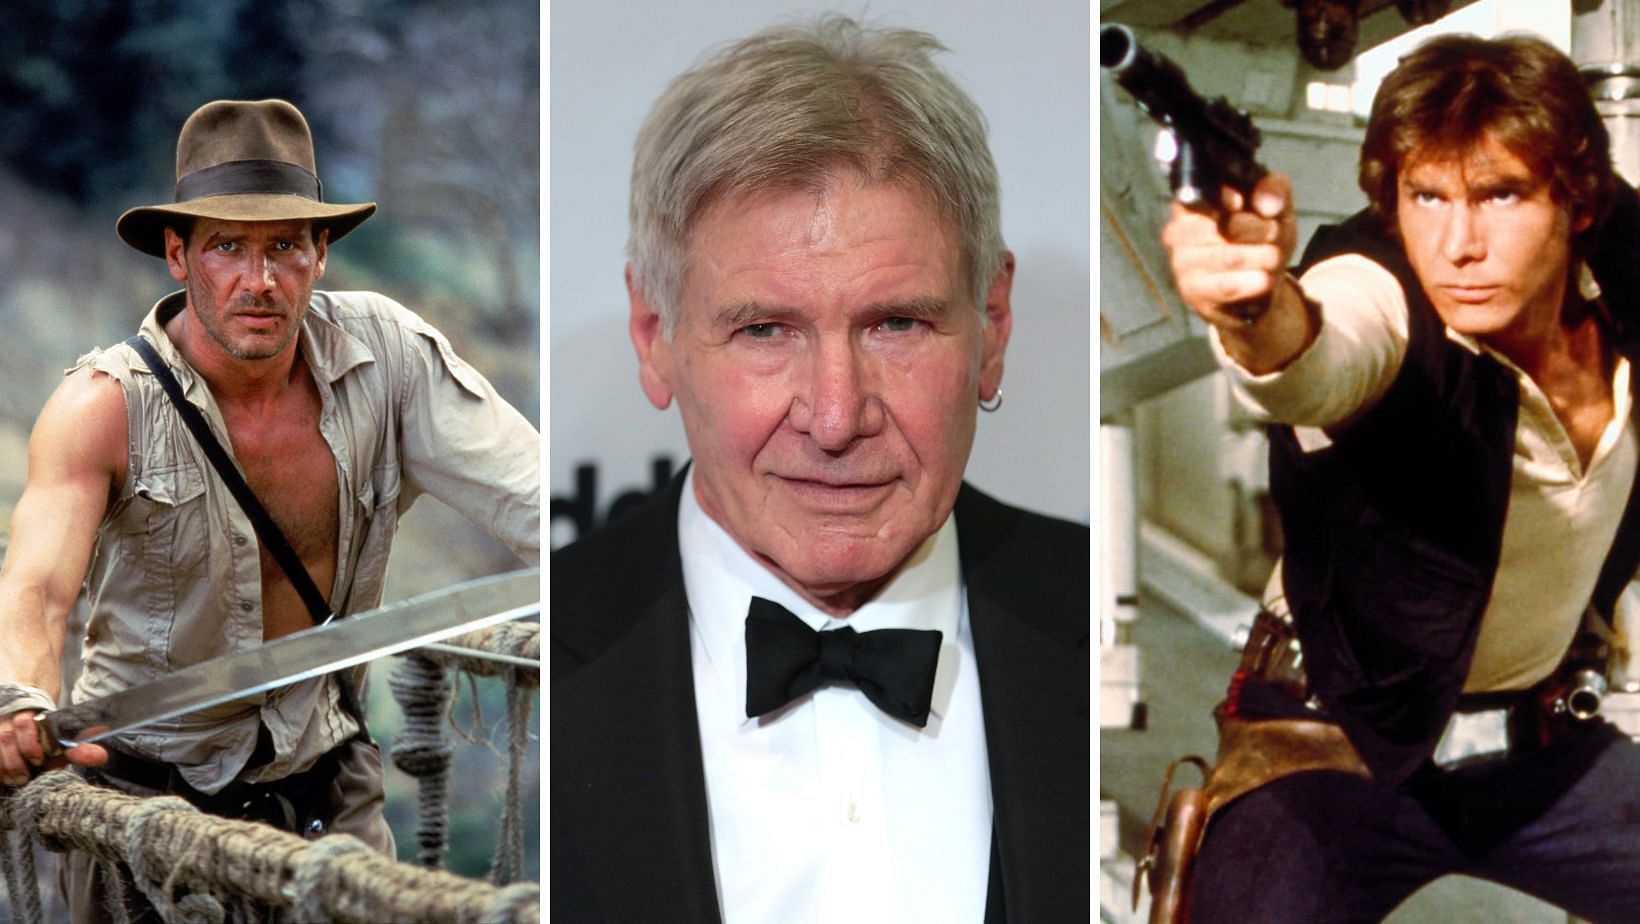 The Legends of Adventure: Han Solo and Indiana Jones, two iconic characters brought to life by Harrison Ford (Image via Sportskeeda and Lucasfilm)